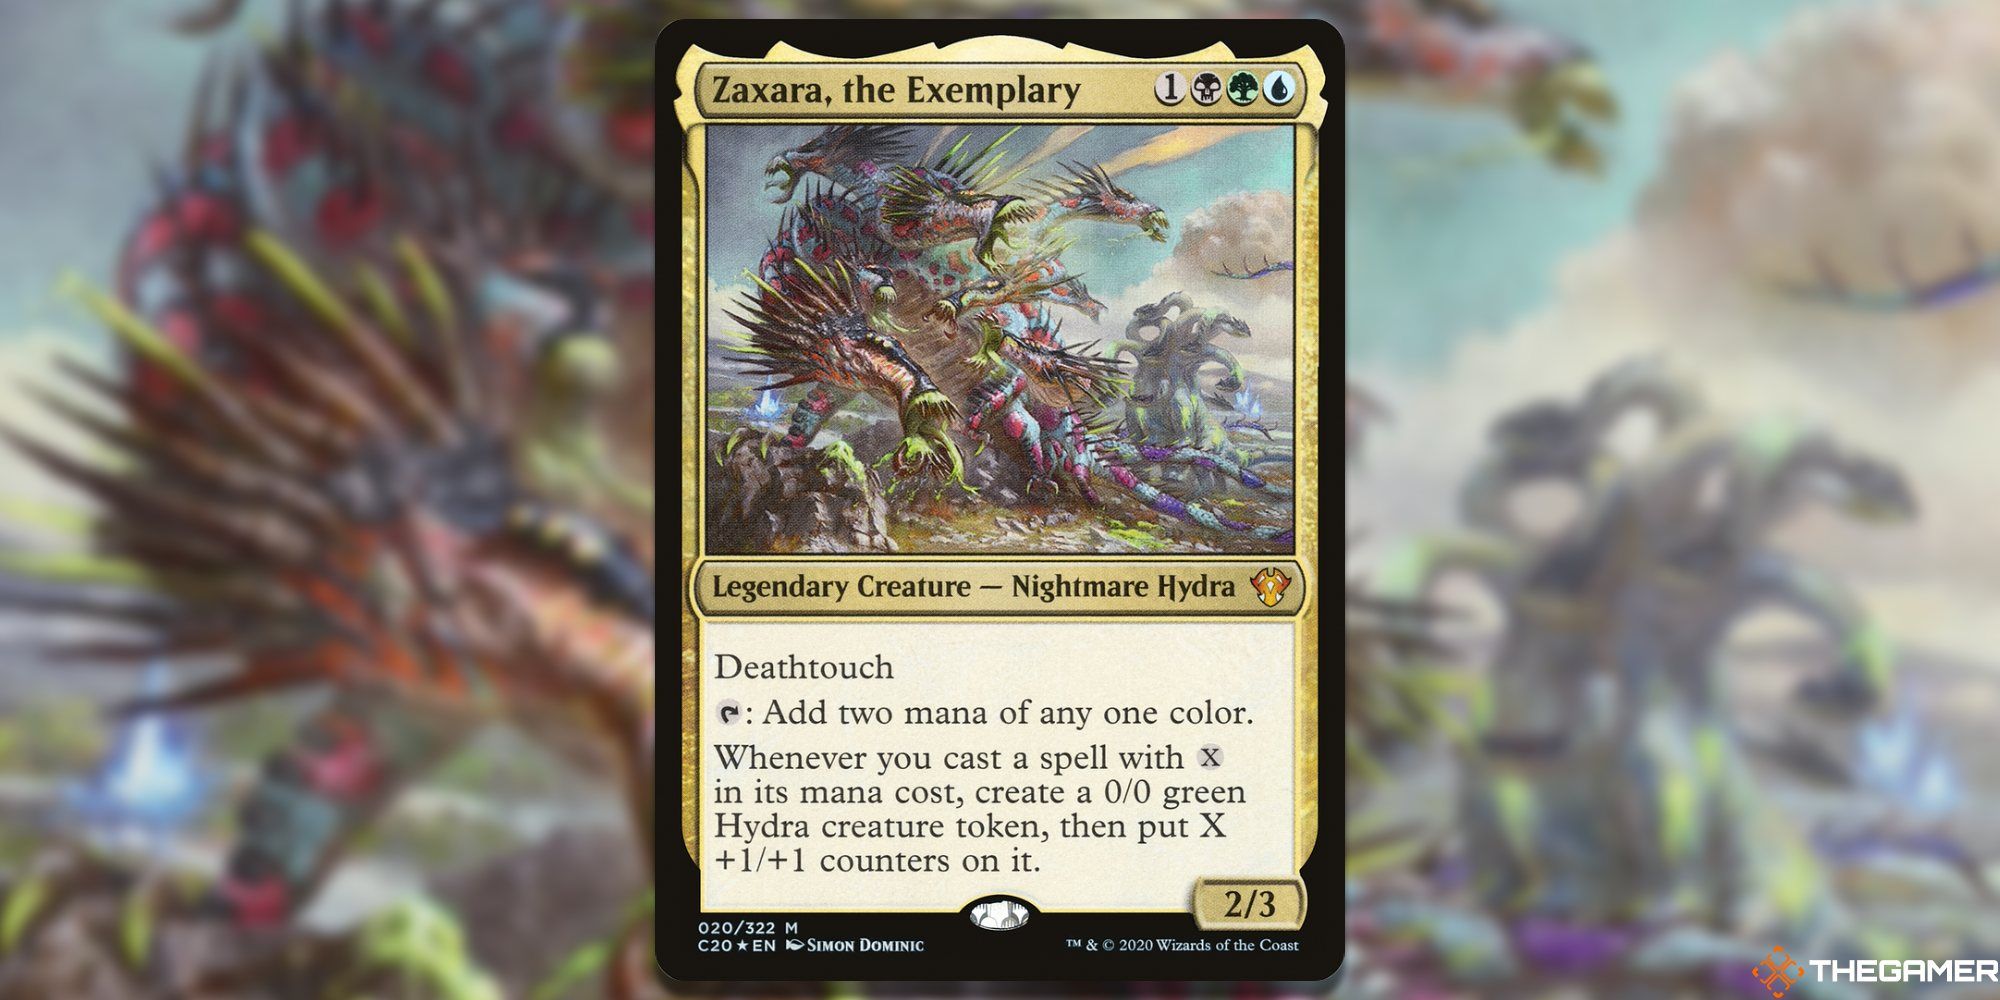 Image of the Zaxara, the Exemplary card in Magic: The Gathering, with art by Simon Dominic